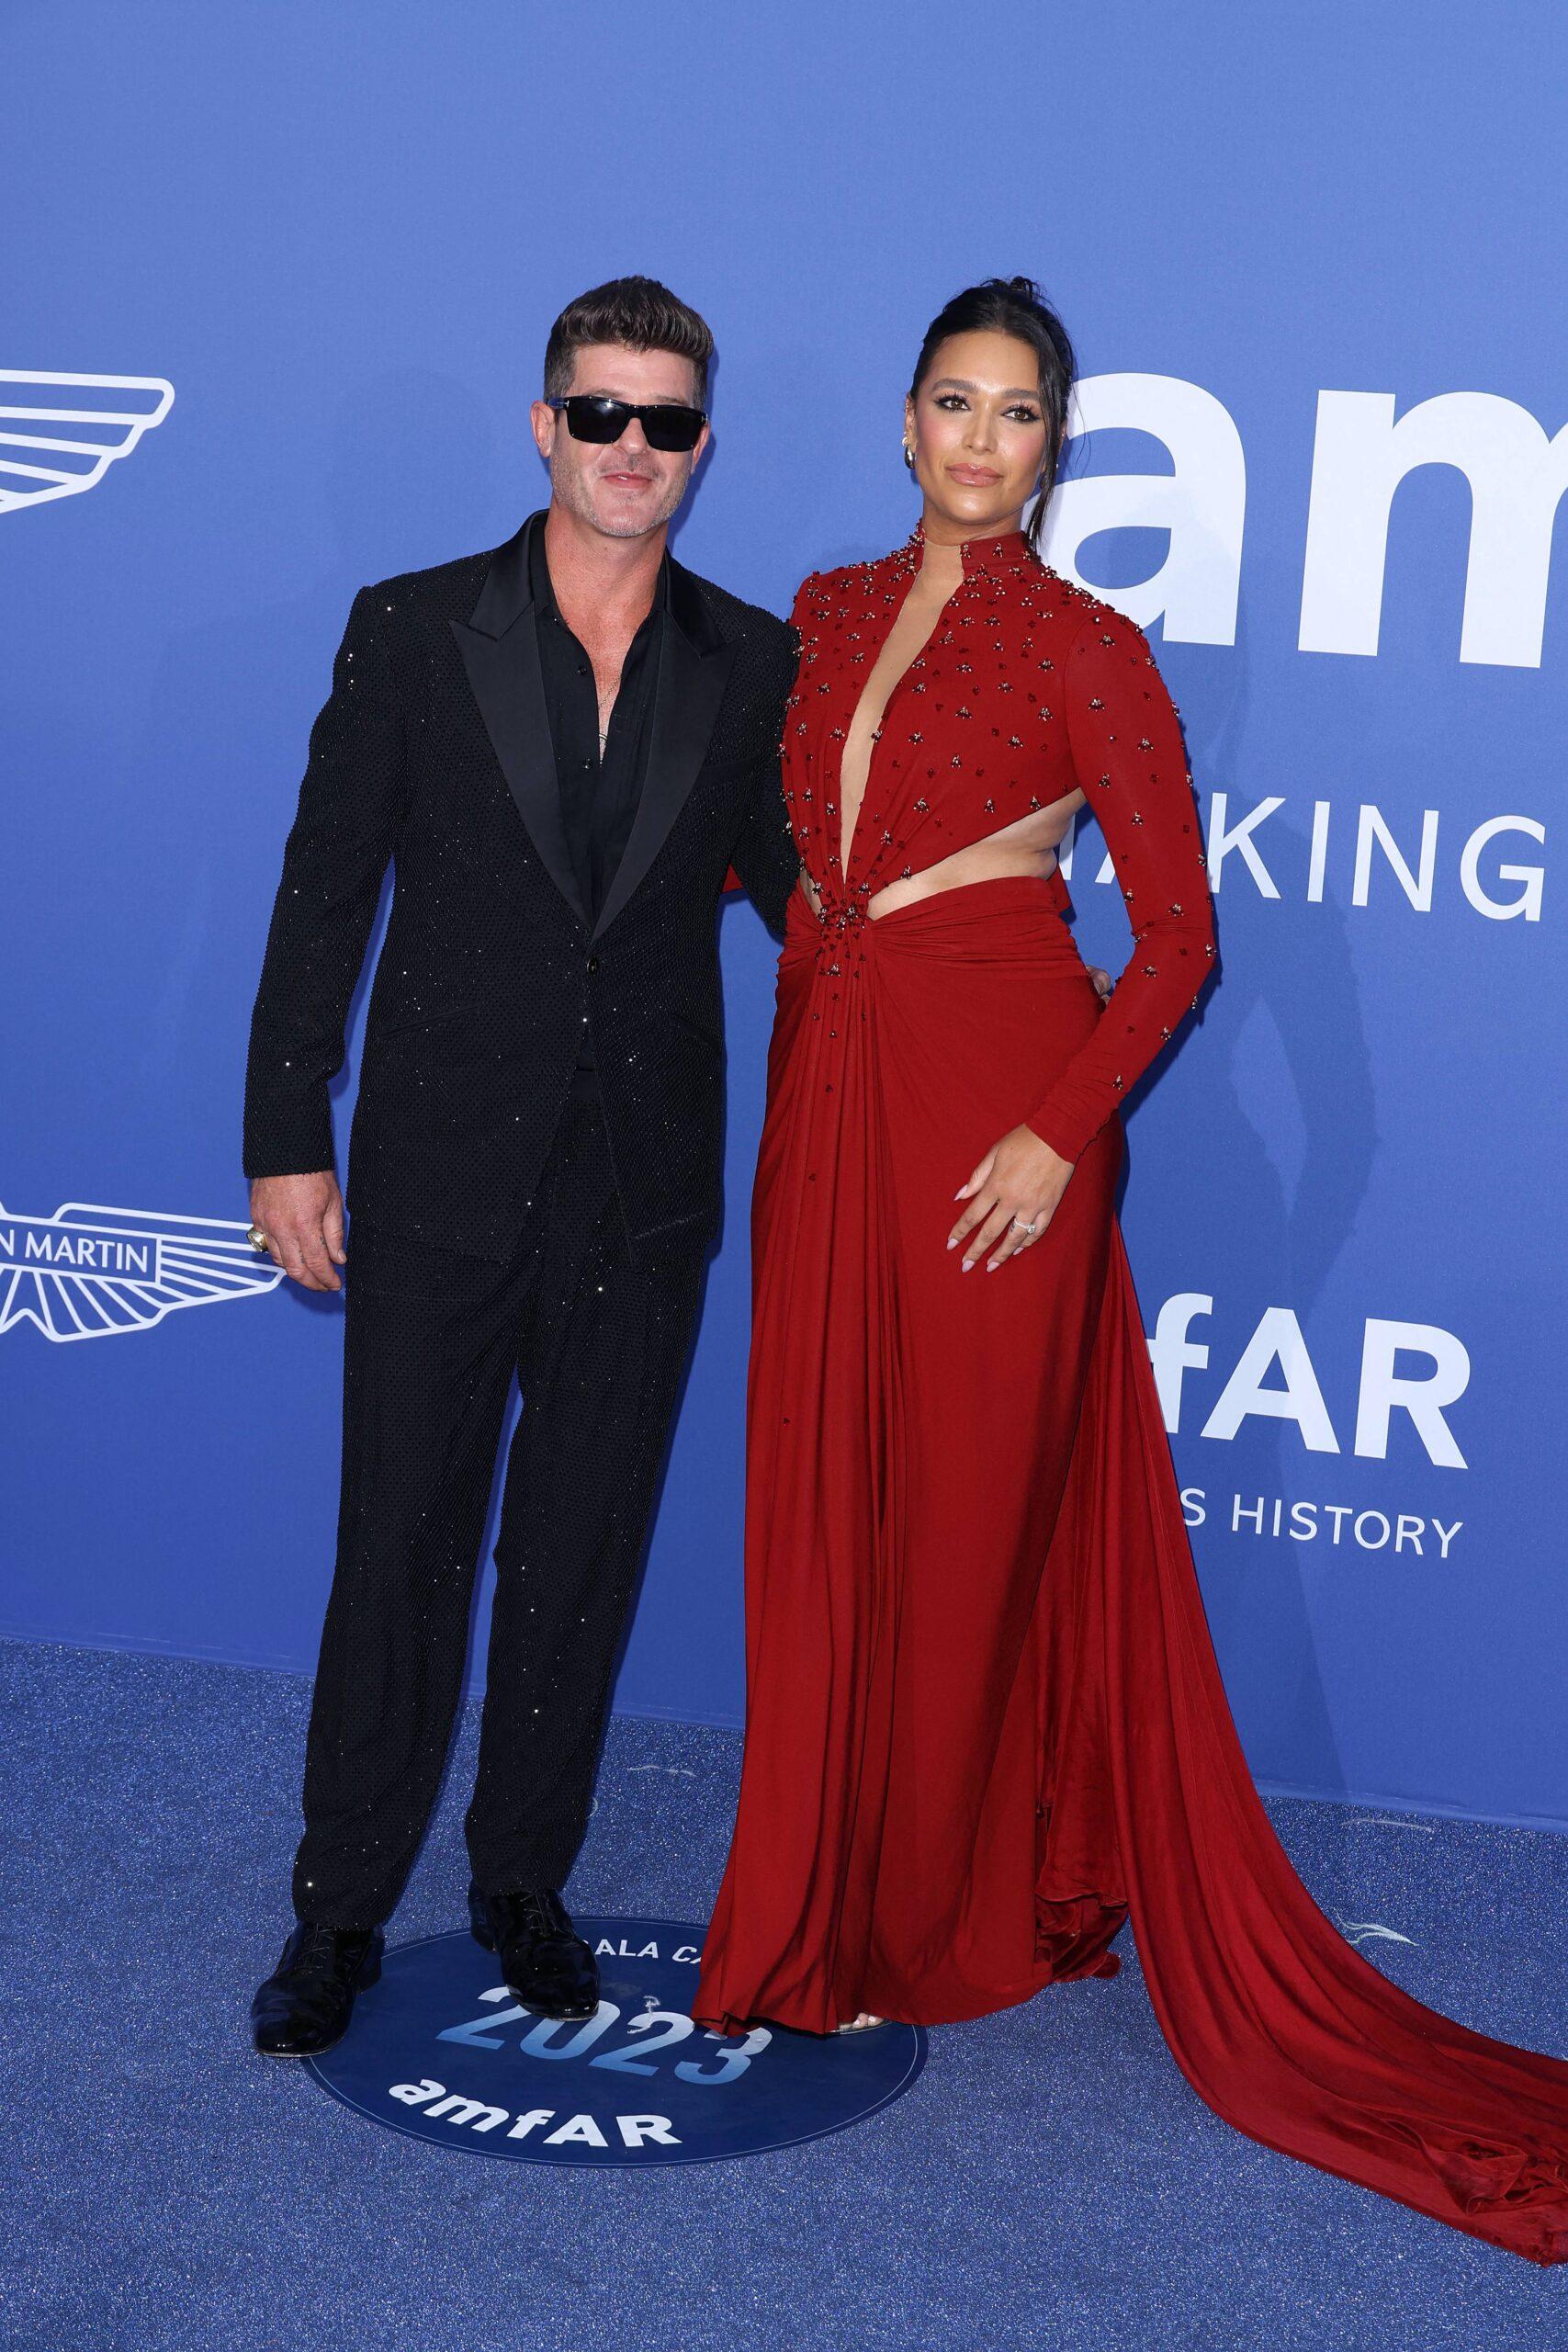 April Love Geary and Robin Thicke at The amfAR Cannes Gala 2023 at Hotel du Cap-Eden-Roc